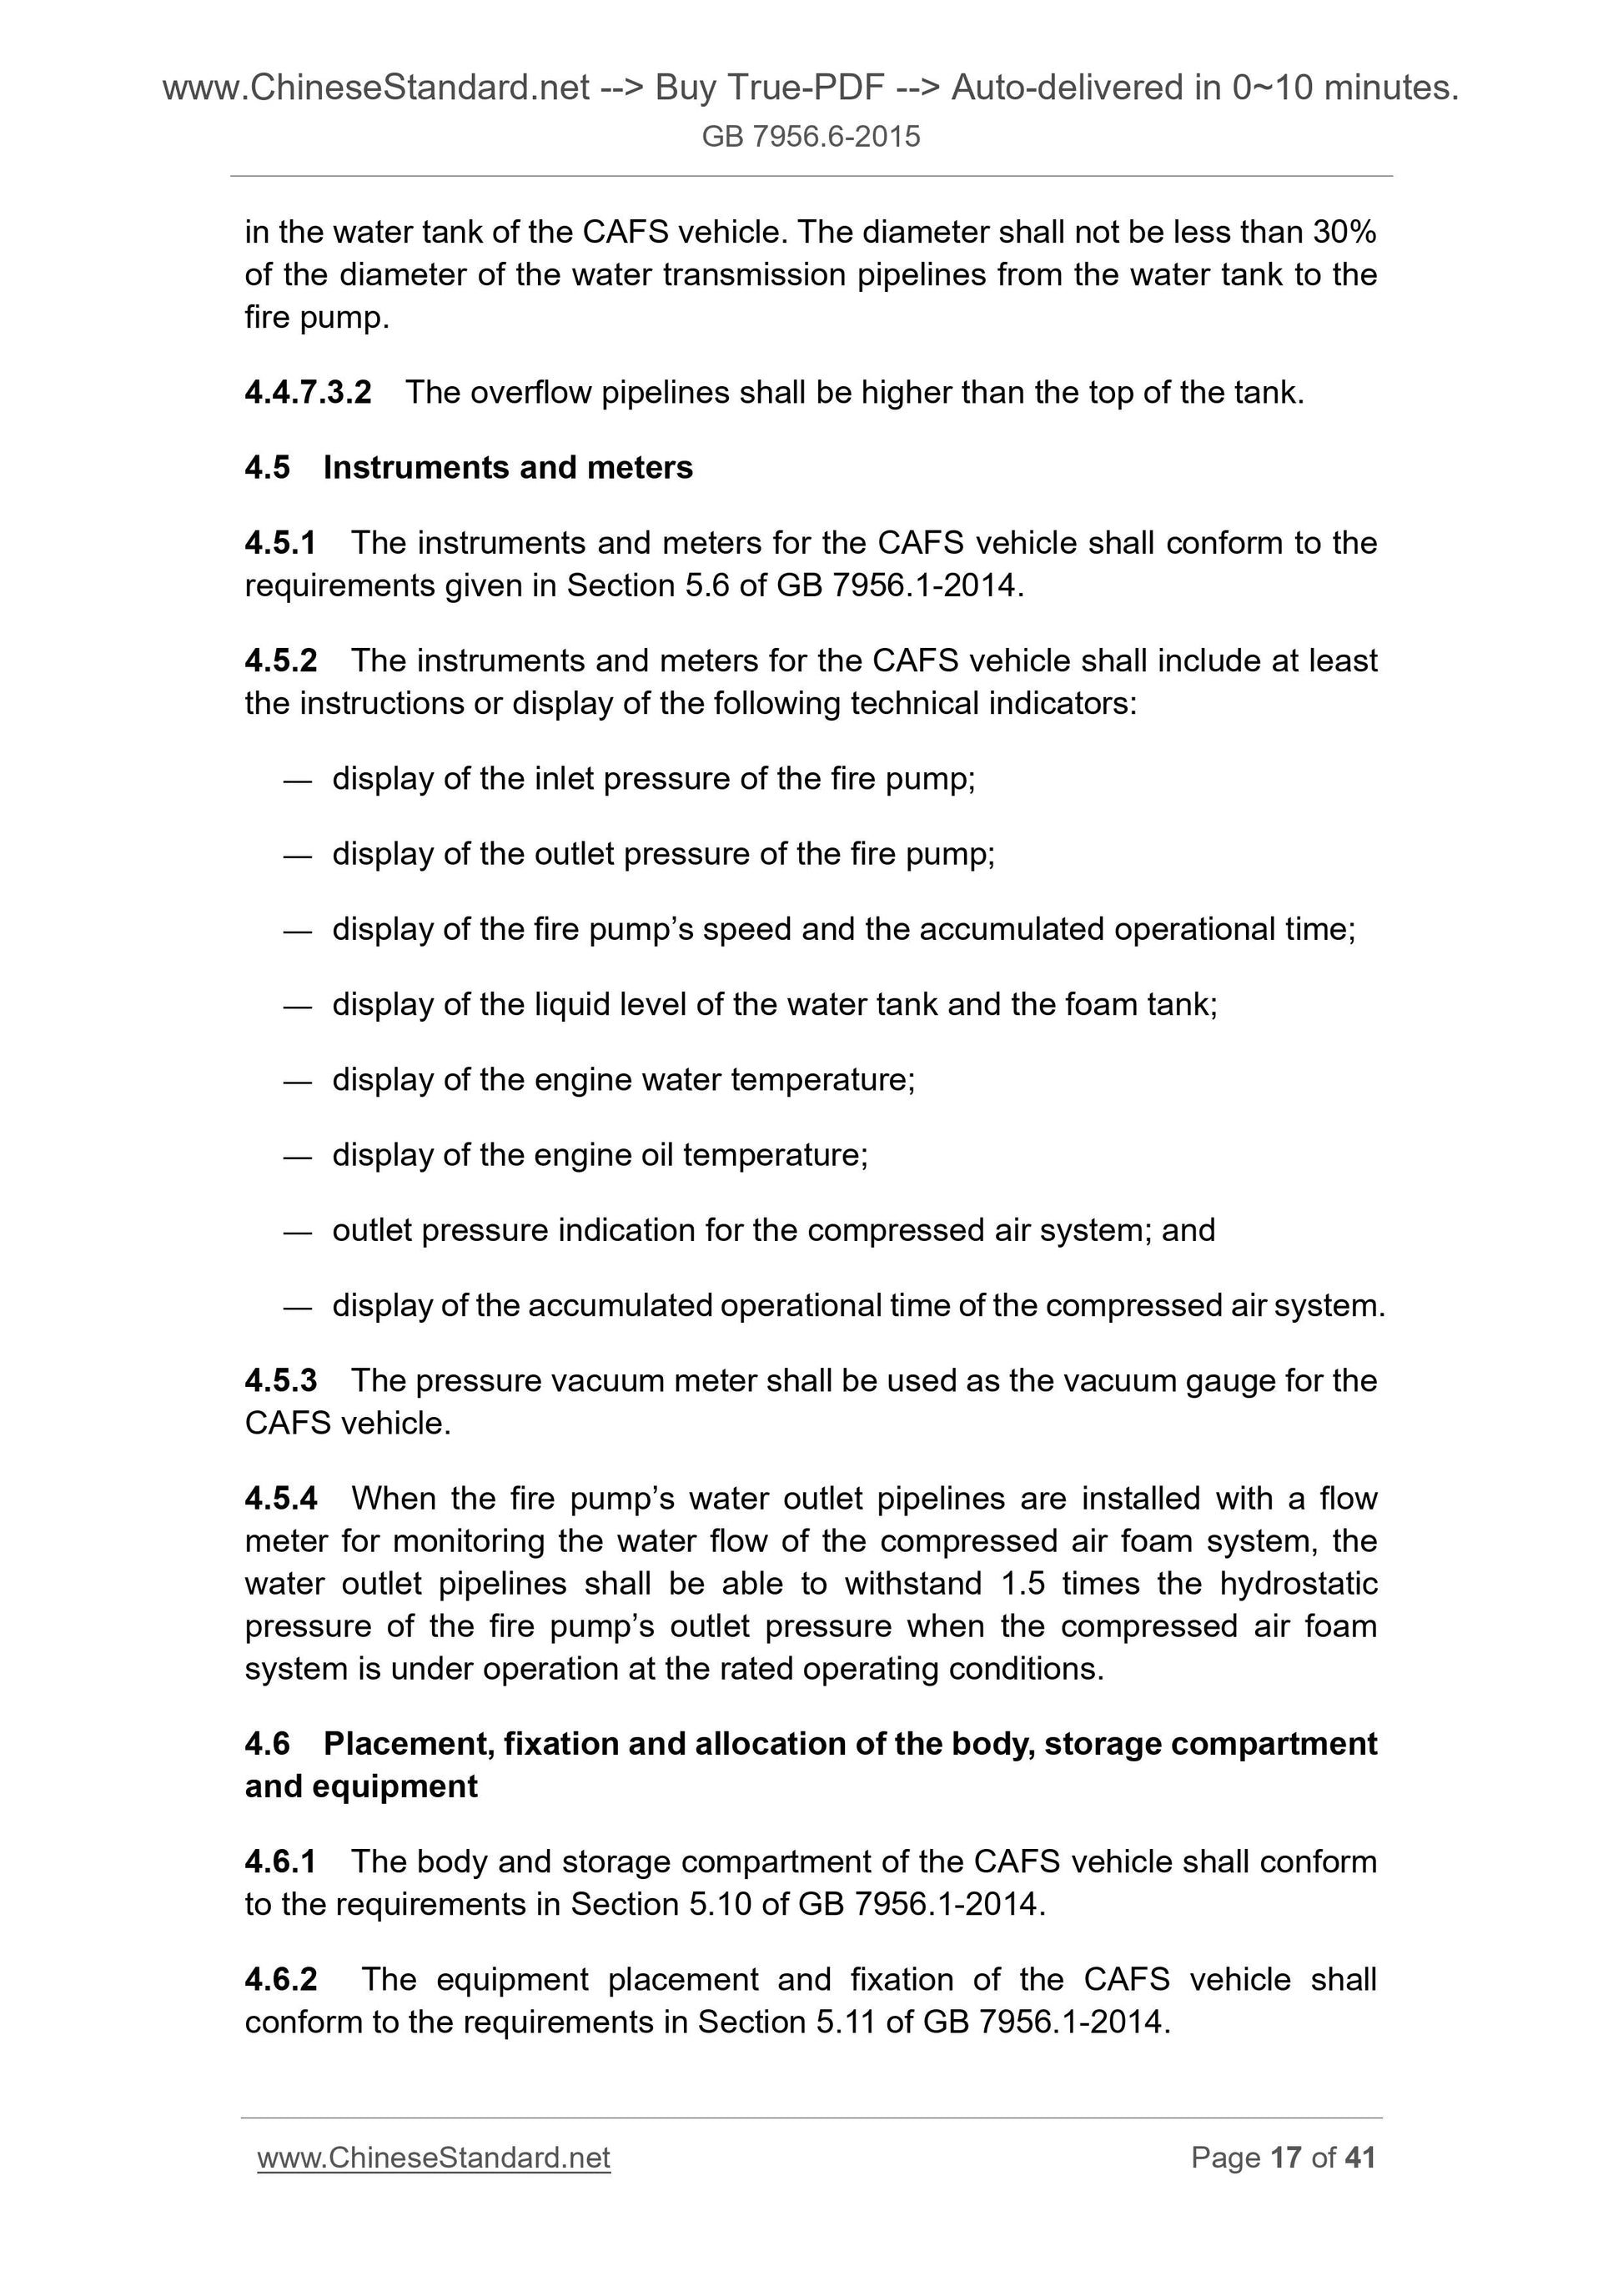 GB 7956.6-2015 Page 11